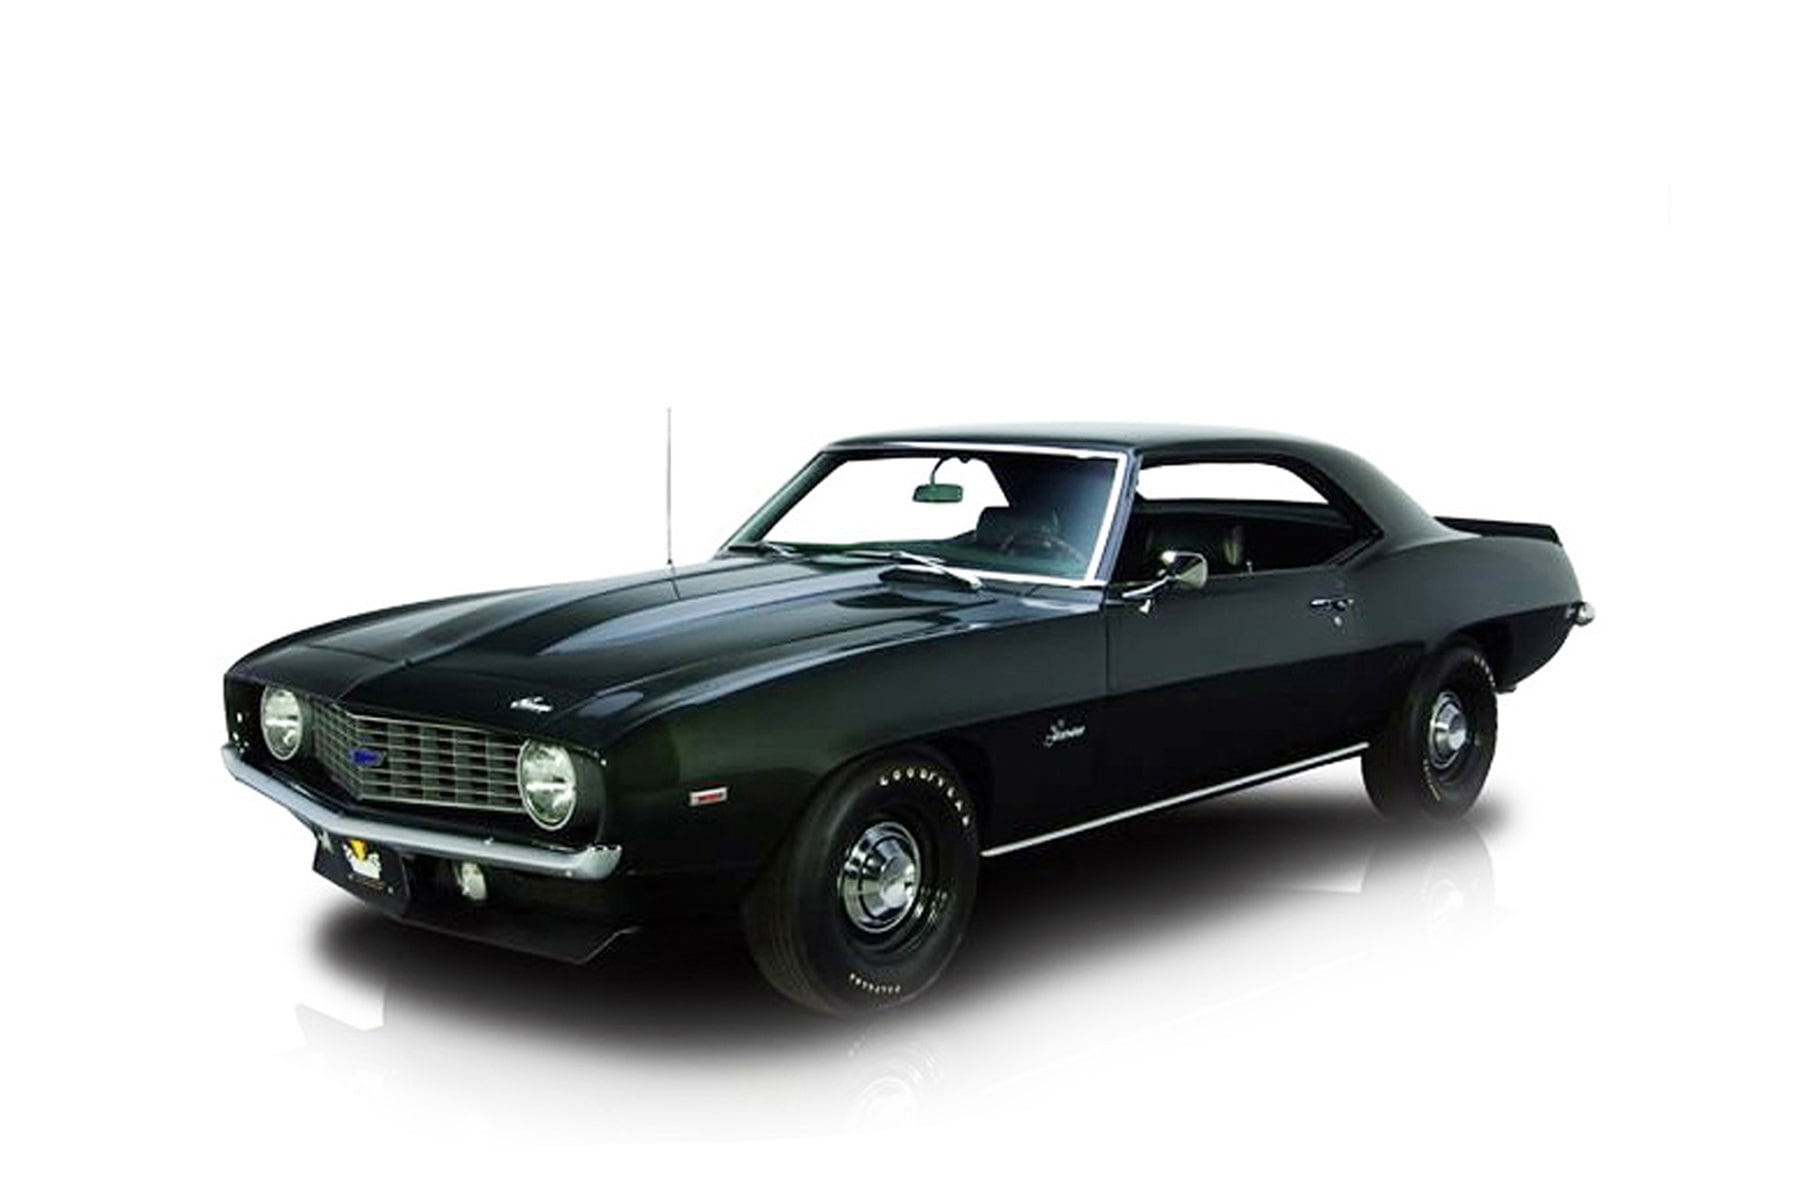 Details about    Greenlight GL Muscle Series 22 Black 1968 Chevrolet Copo Camaro 1:64 Scale 